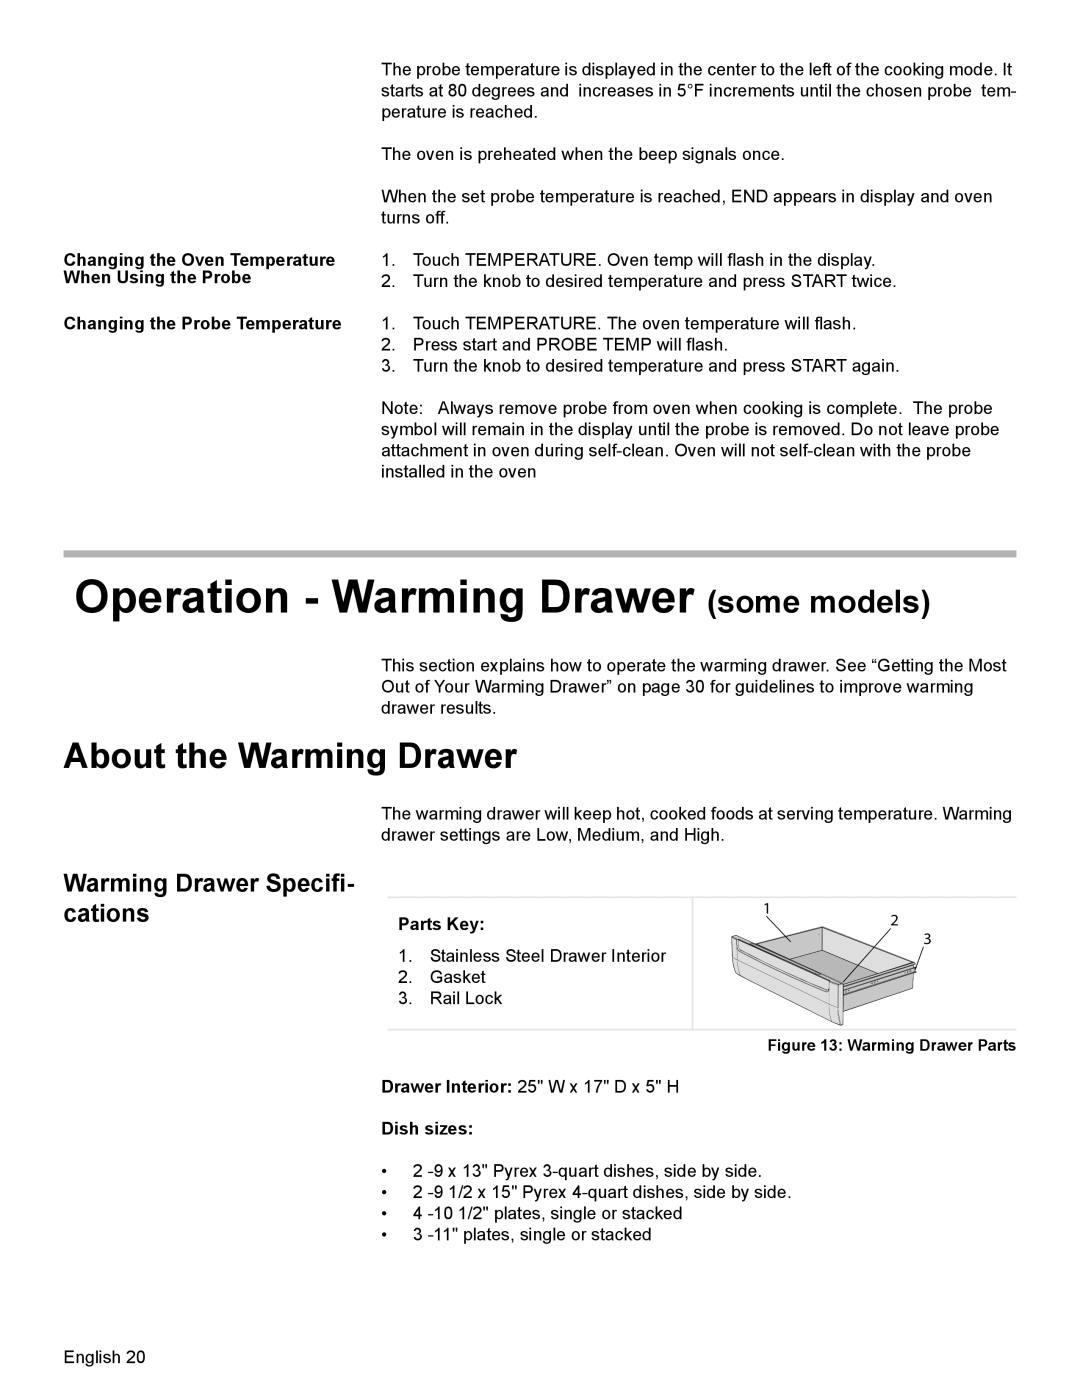 Bosch Appliances HES7052U Operation - Warming Drawer some models, About the Warming Drawer, Changing the Probe Temperature 